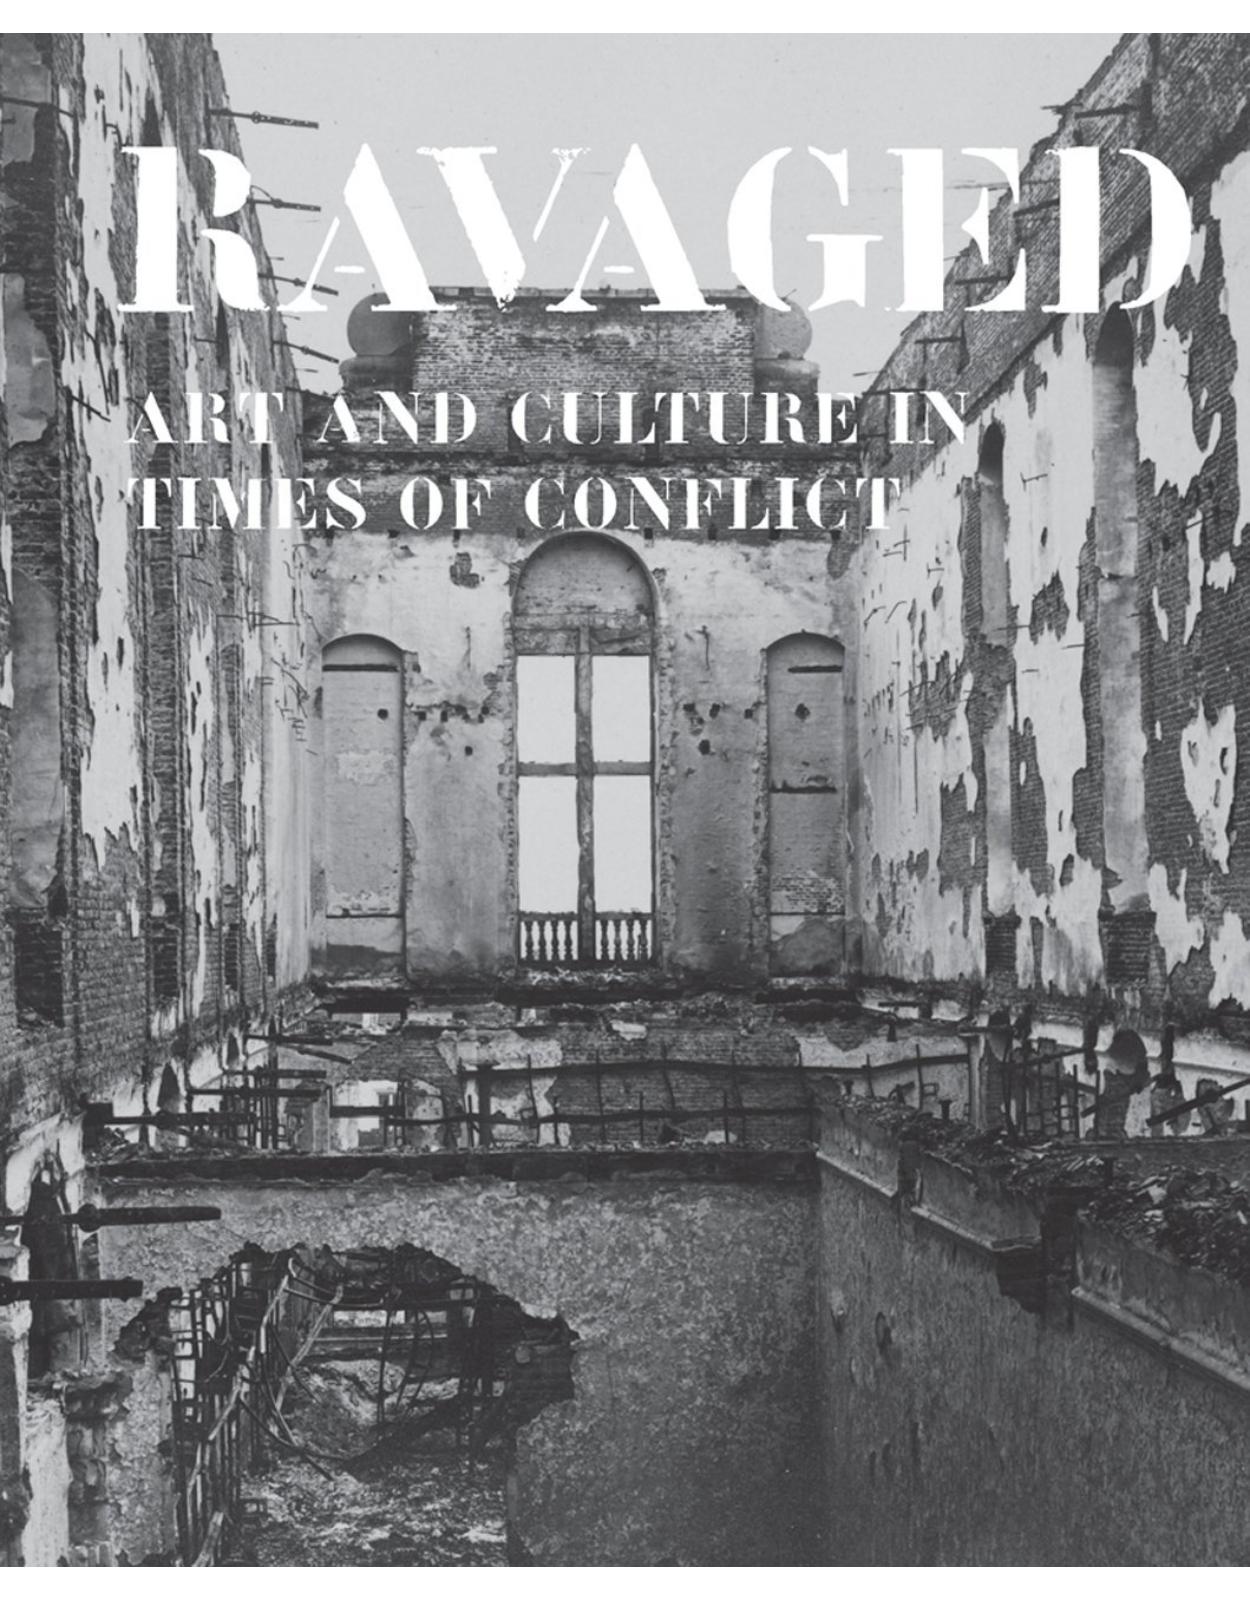 Ravaged. Art and Heritage in Times of Conflict